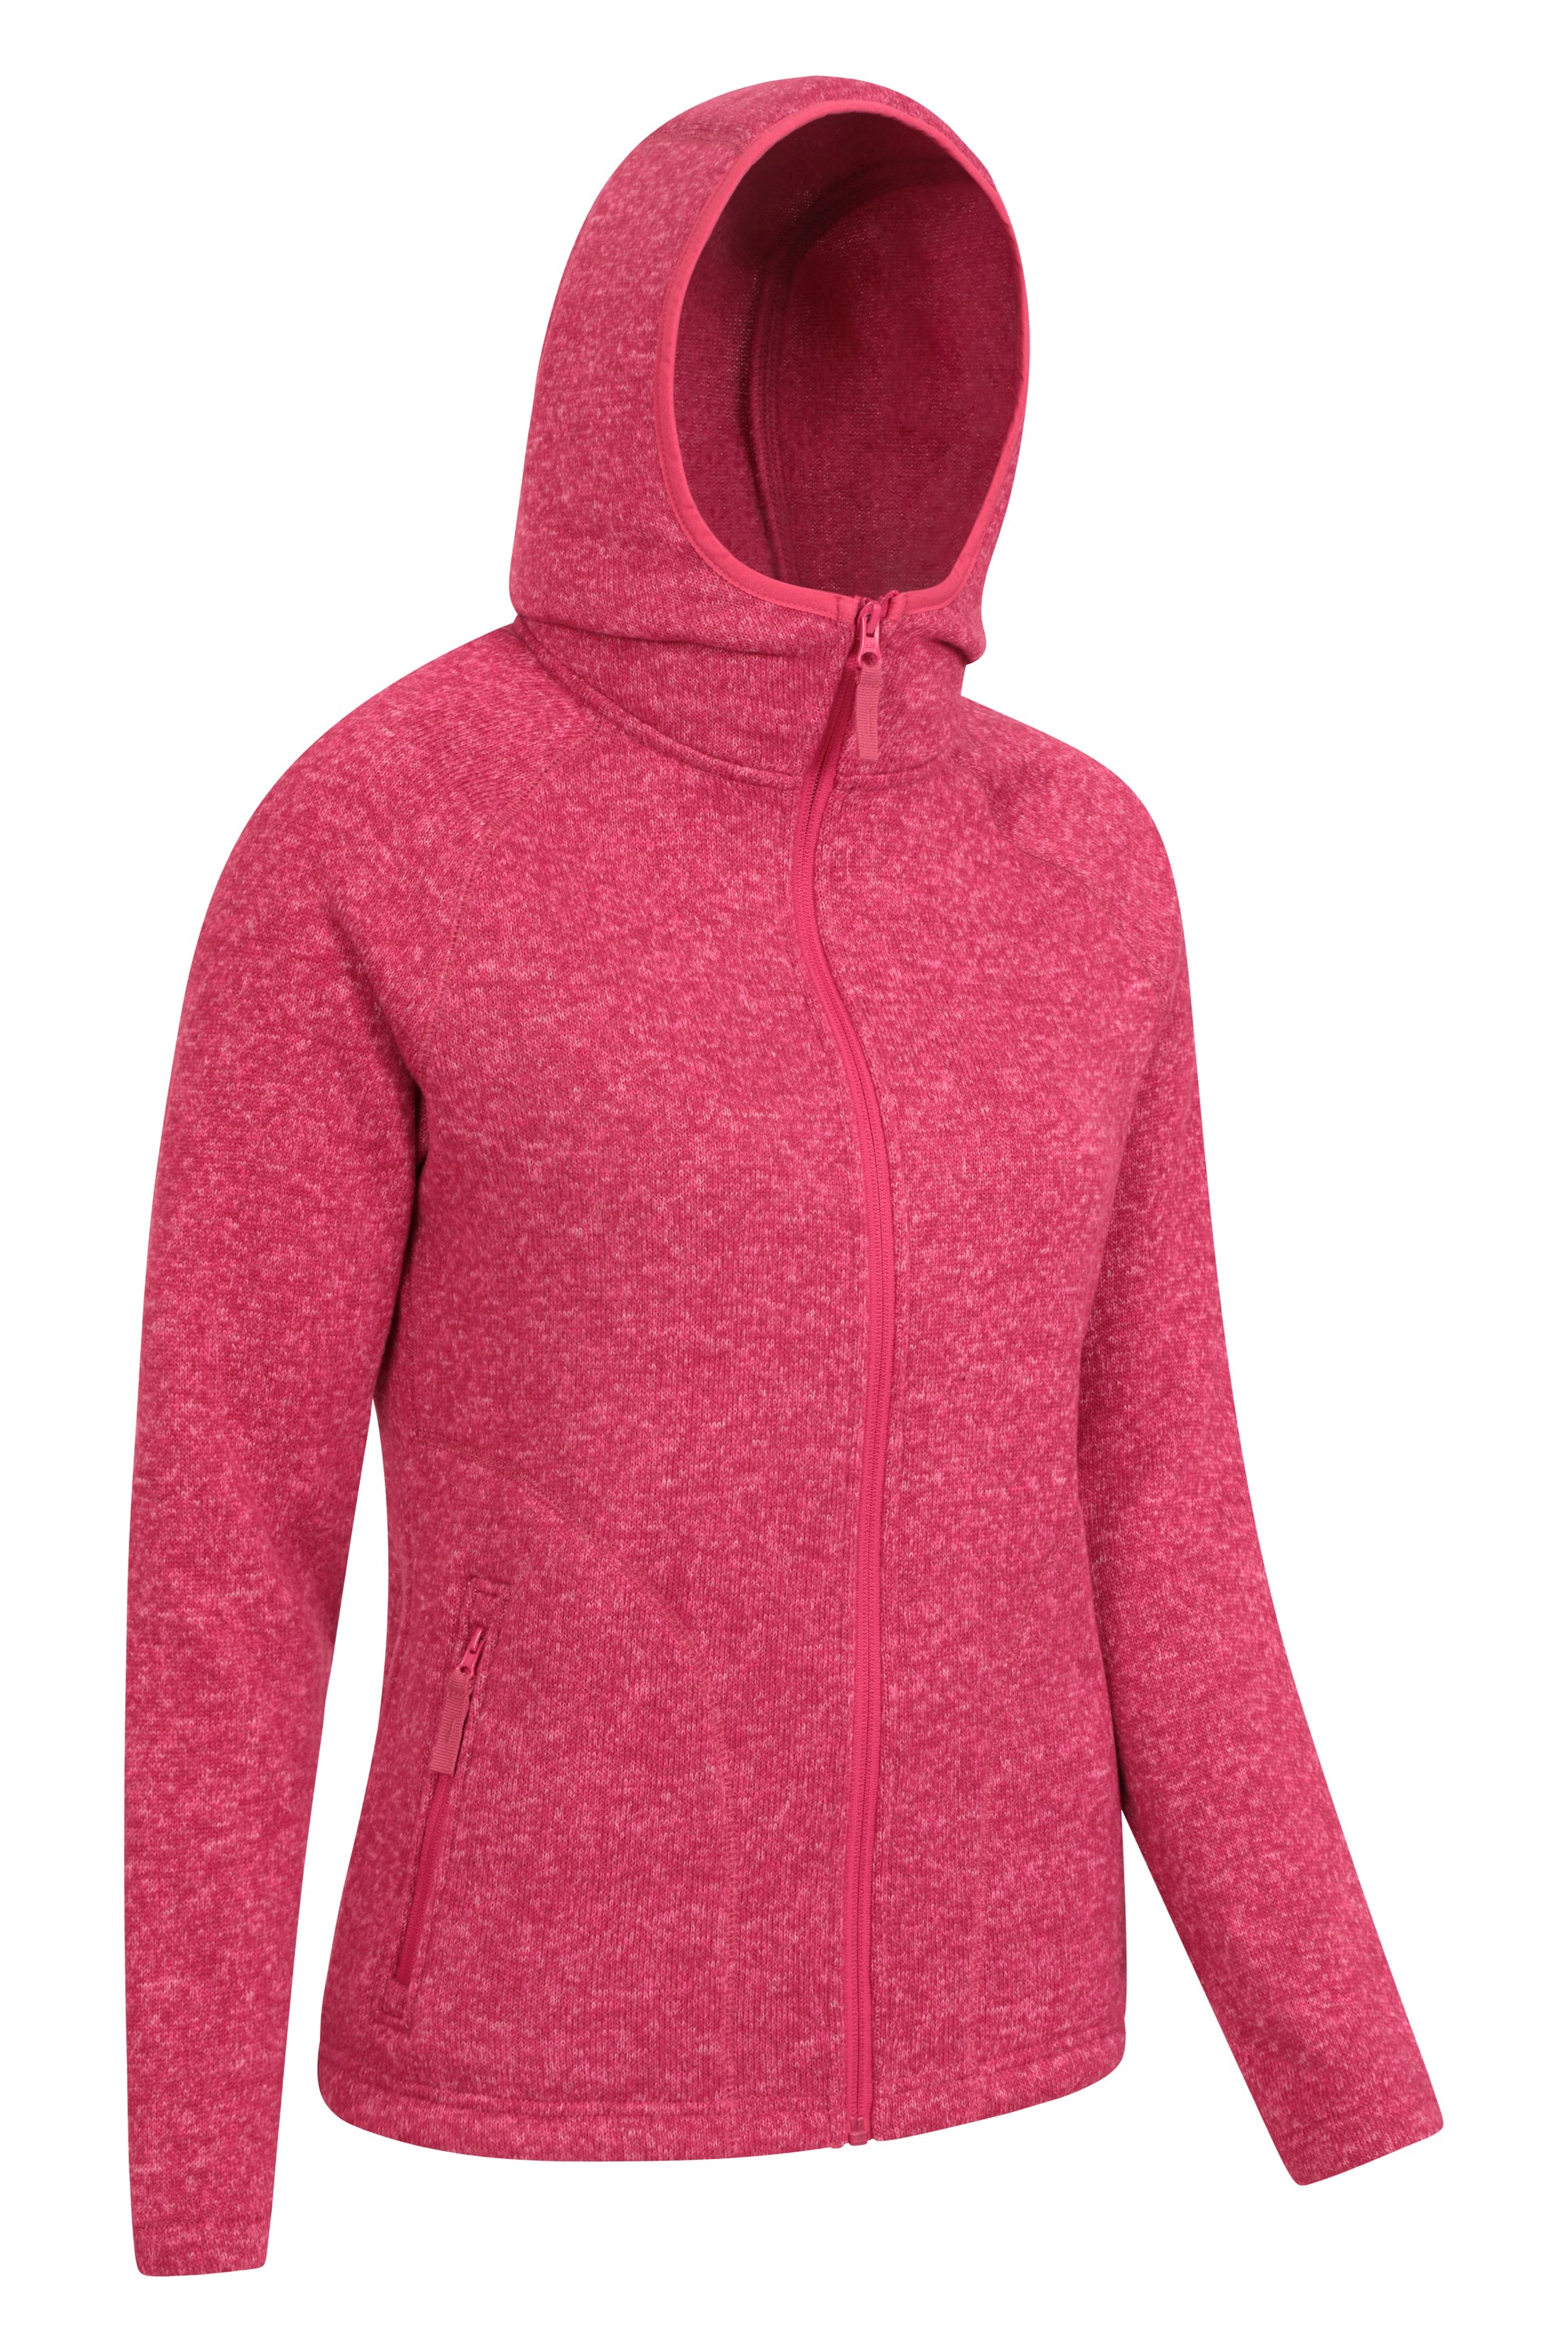 Best for Camping Mountain Warehouse Relax Womens Funnel Neck Fleece Outdoors Travelling & Hiking Bonded Fleece Ladies Sweater